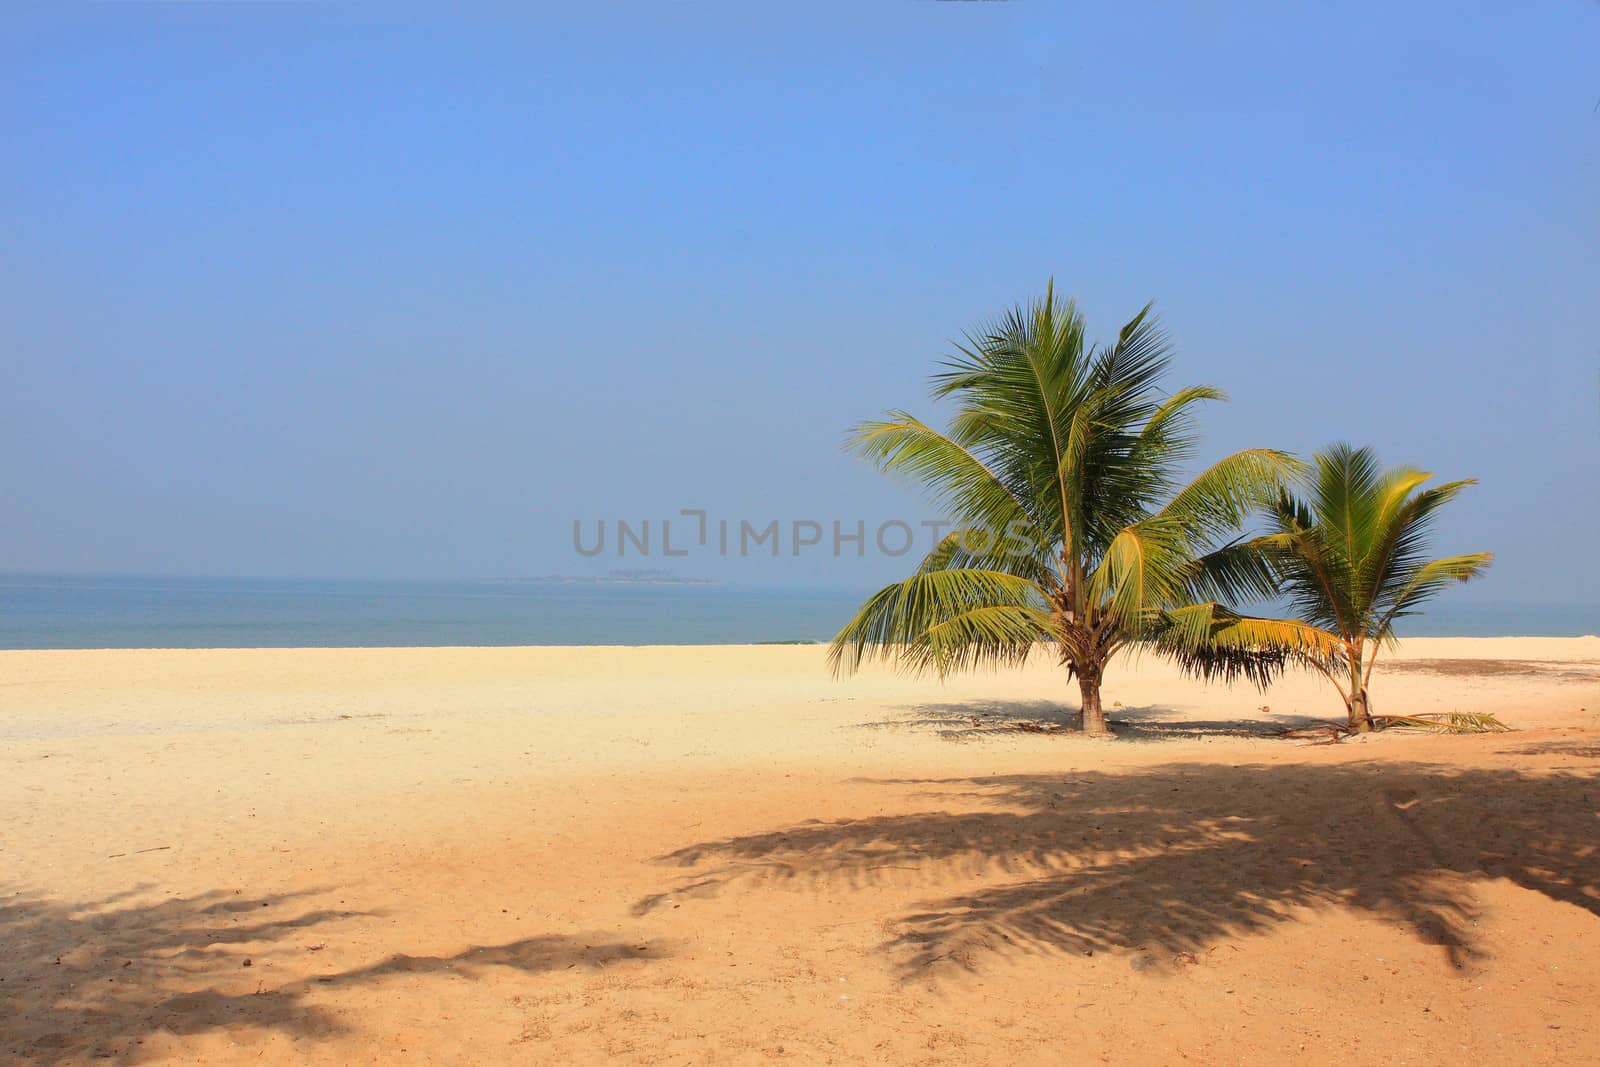 Ocean in India - a wild beach with palm trees by cococinema